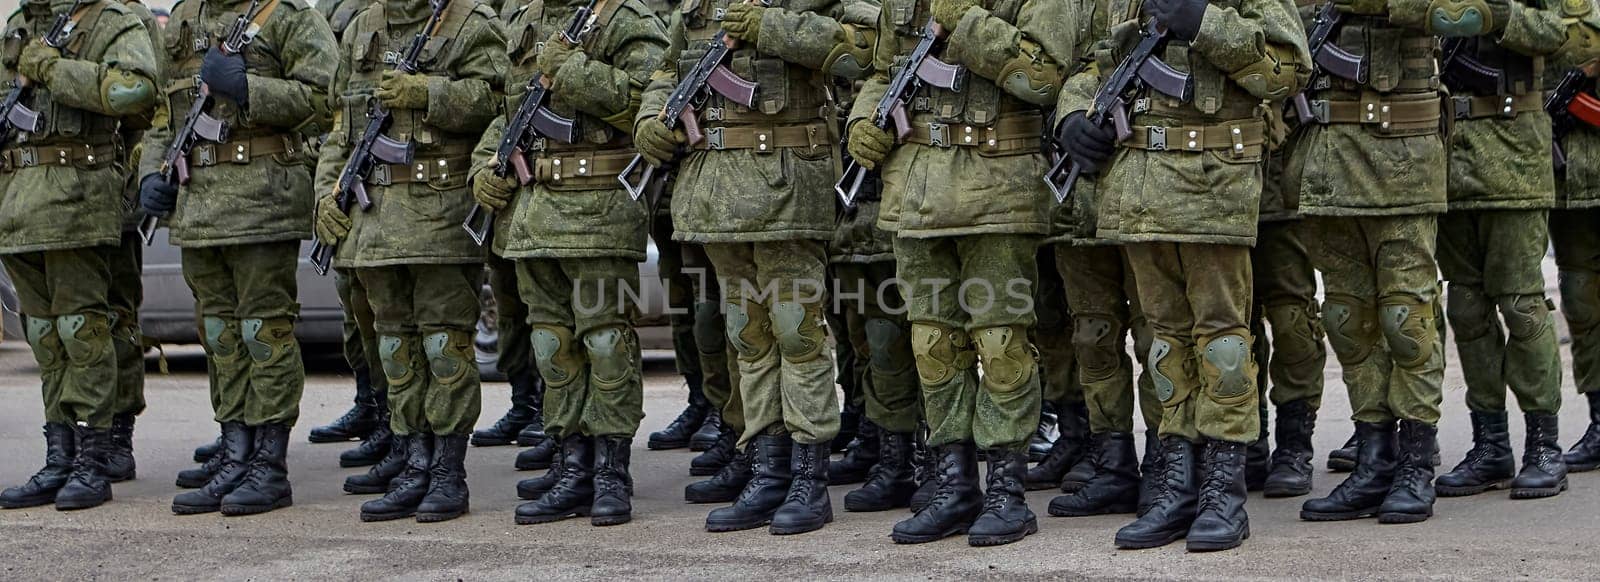 Disciplined soldiers in camouflage march in perfect synchronization during a military parade. Helmets and rifles add to the display of unity and strength, evoking pride.